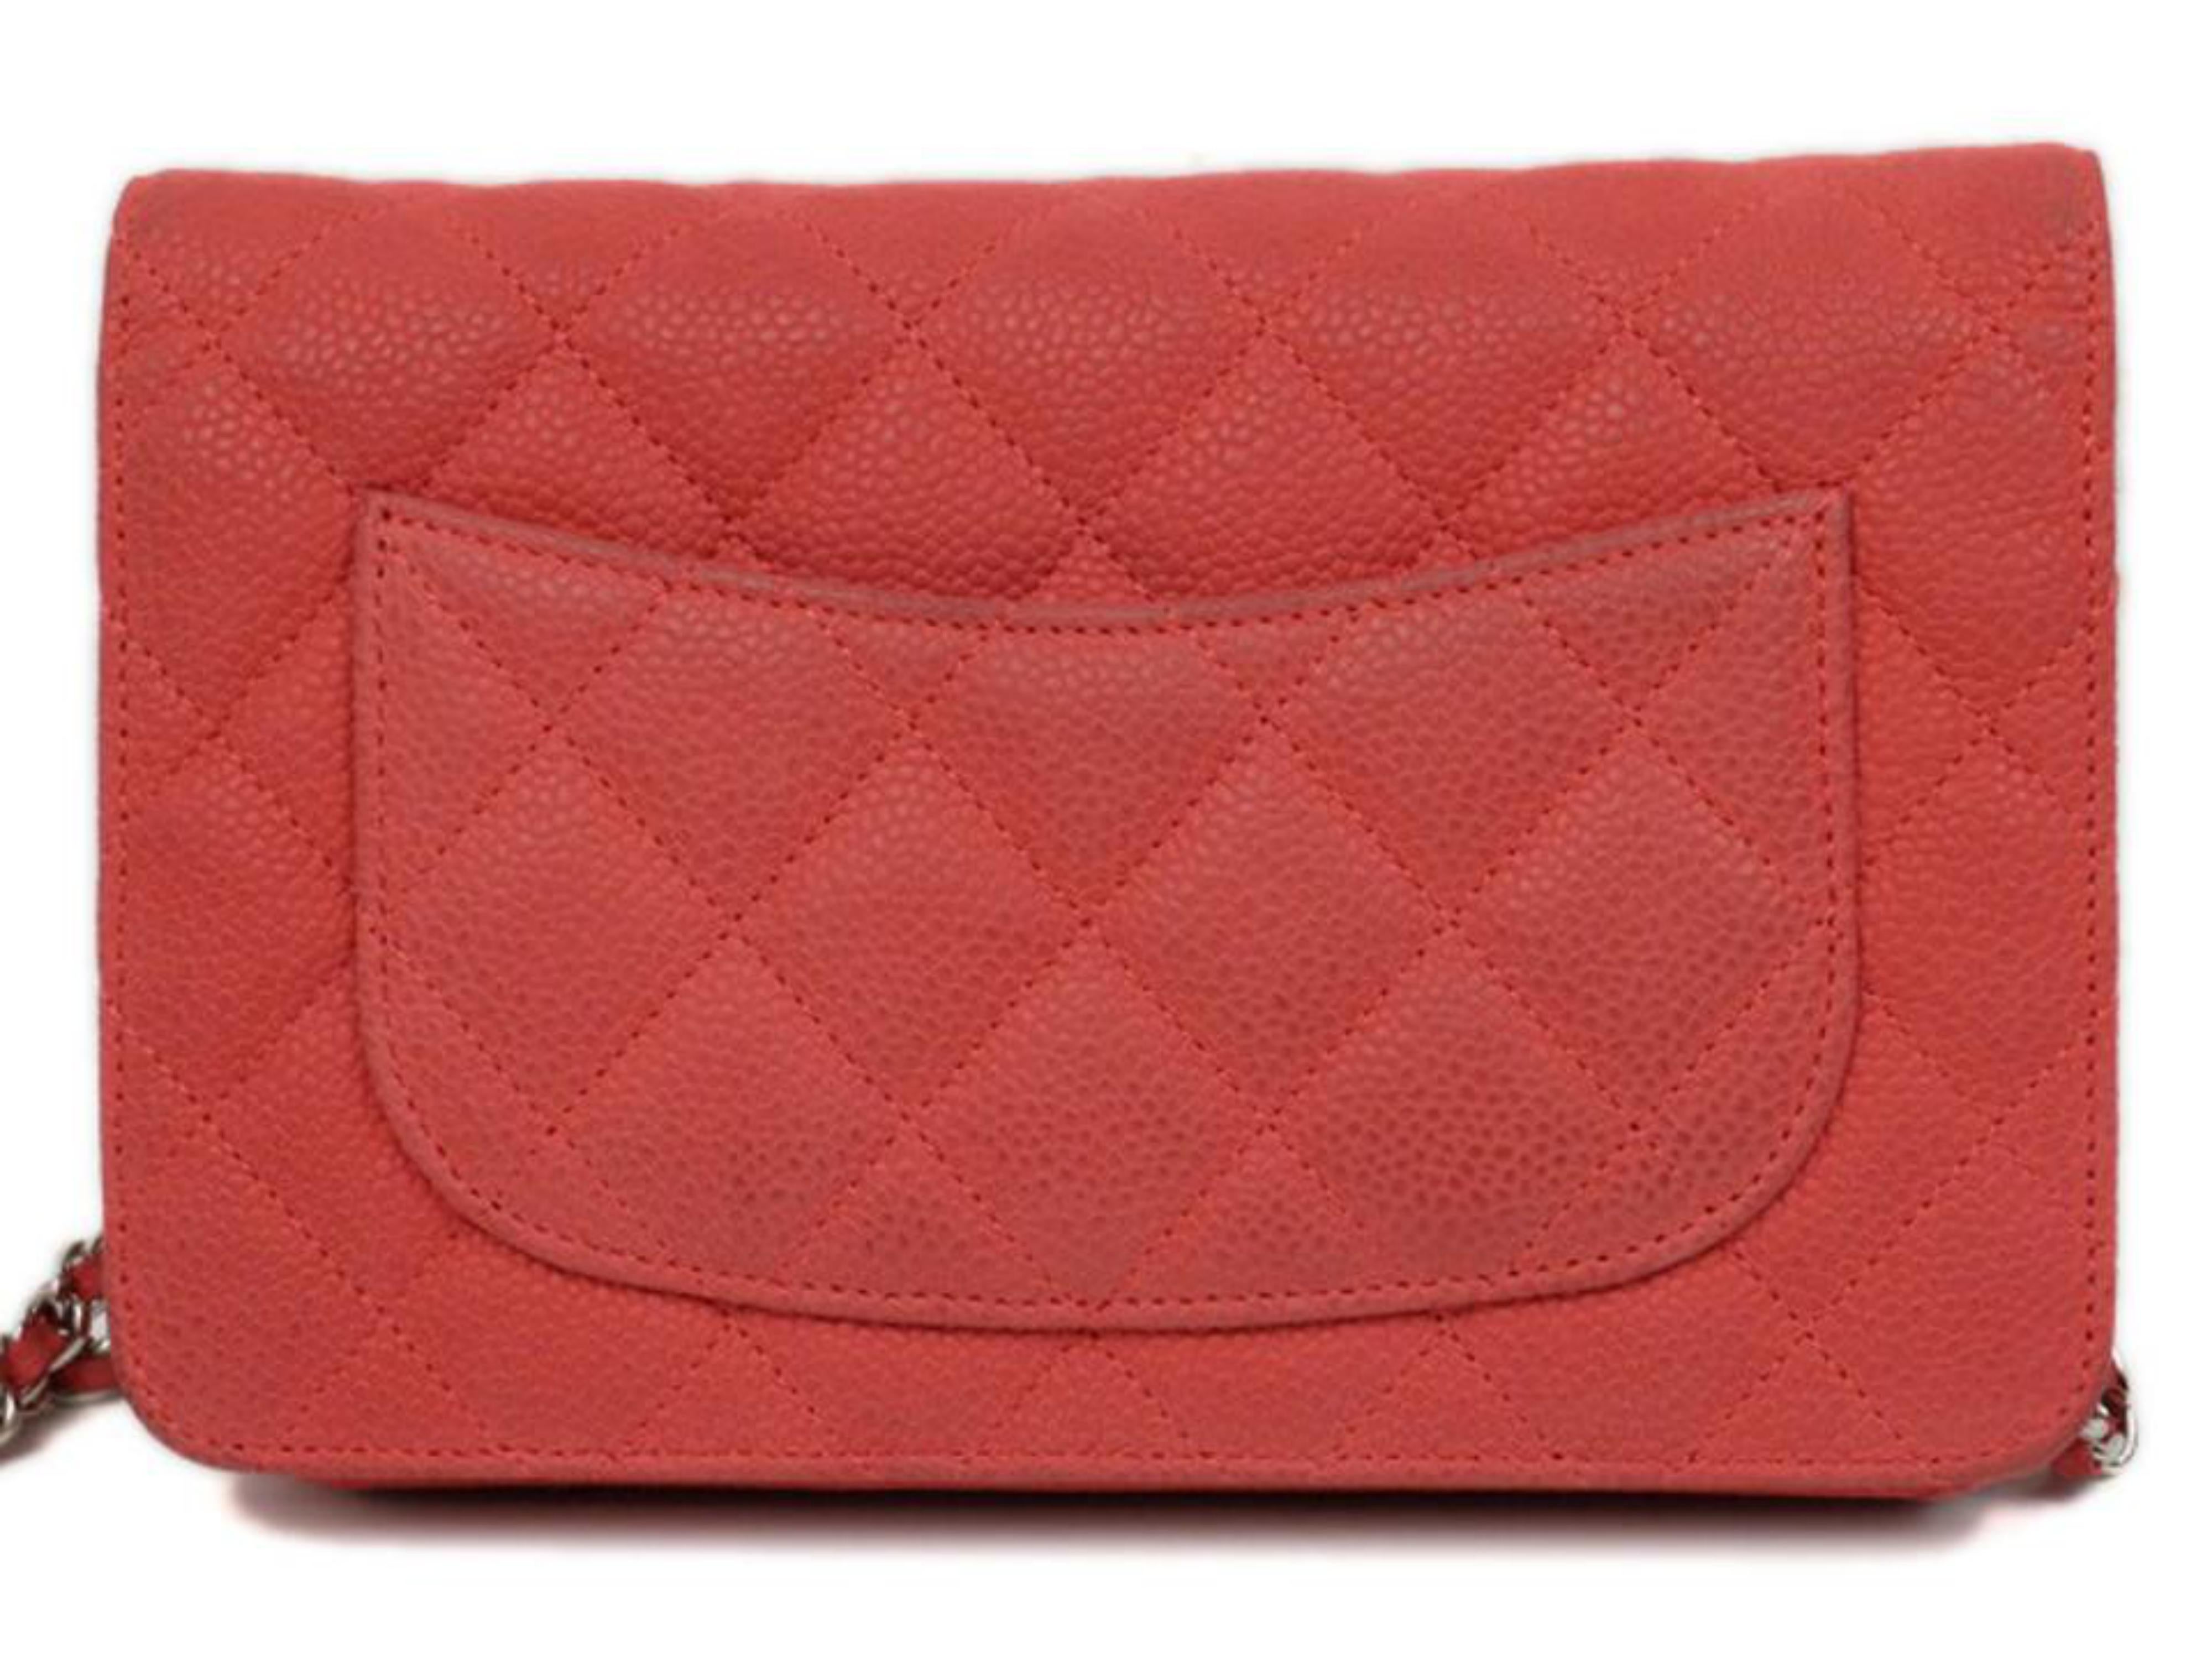 Chanel Wallet on Chain Quilted Caviar 219717 Red Leather Shoulder Bag In Good Condition For Sale In Forest Hills, NY